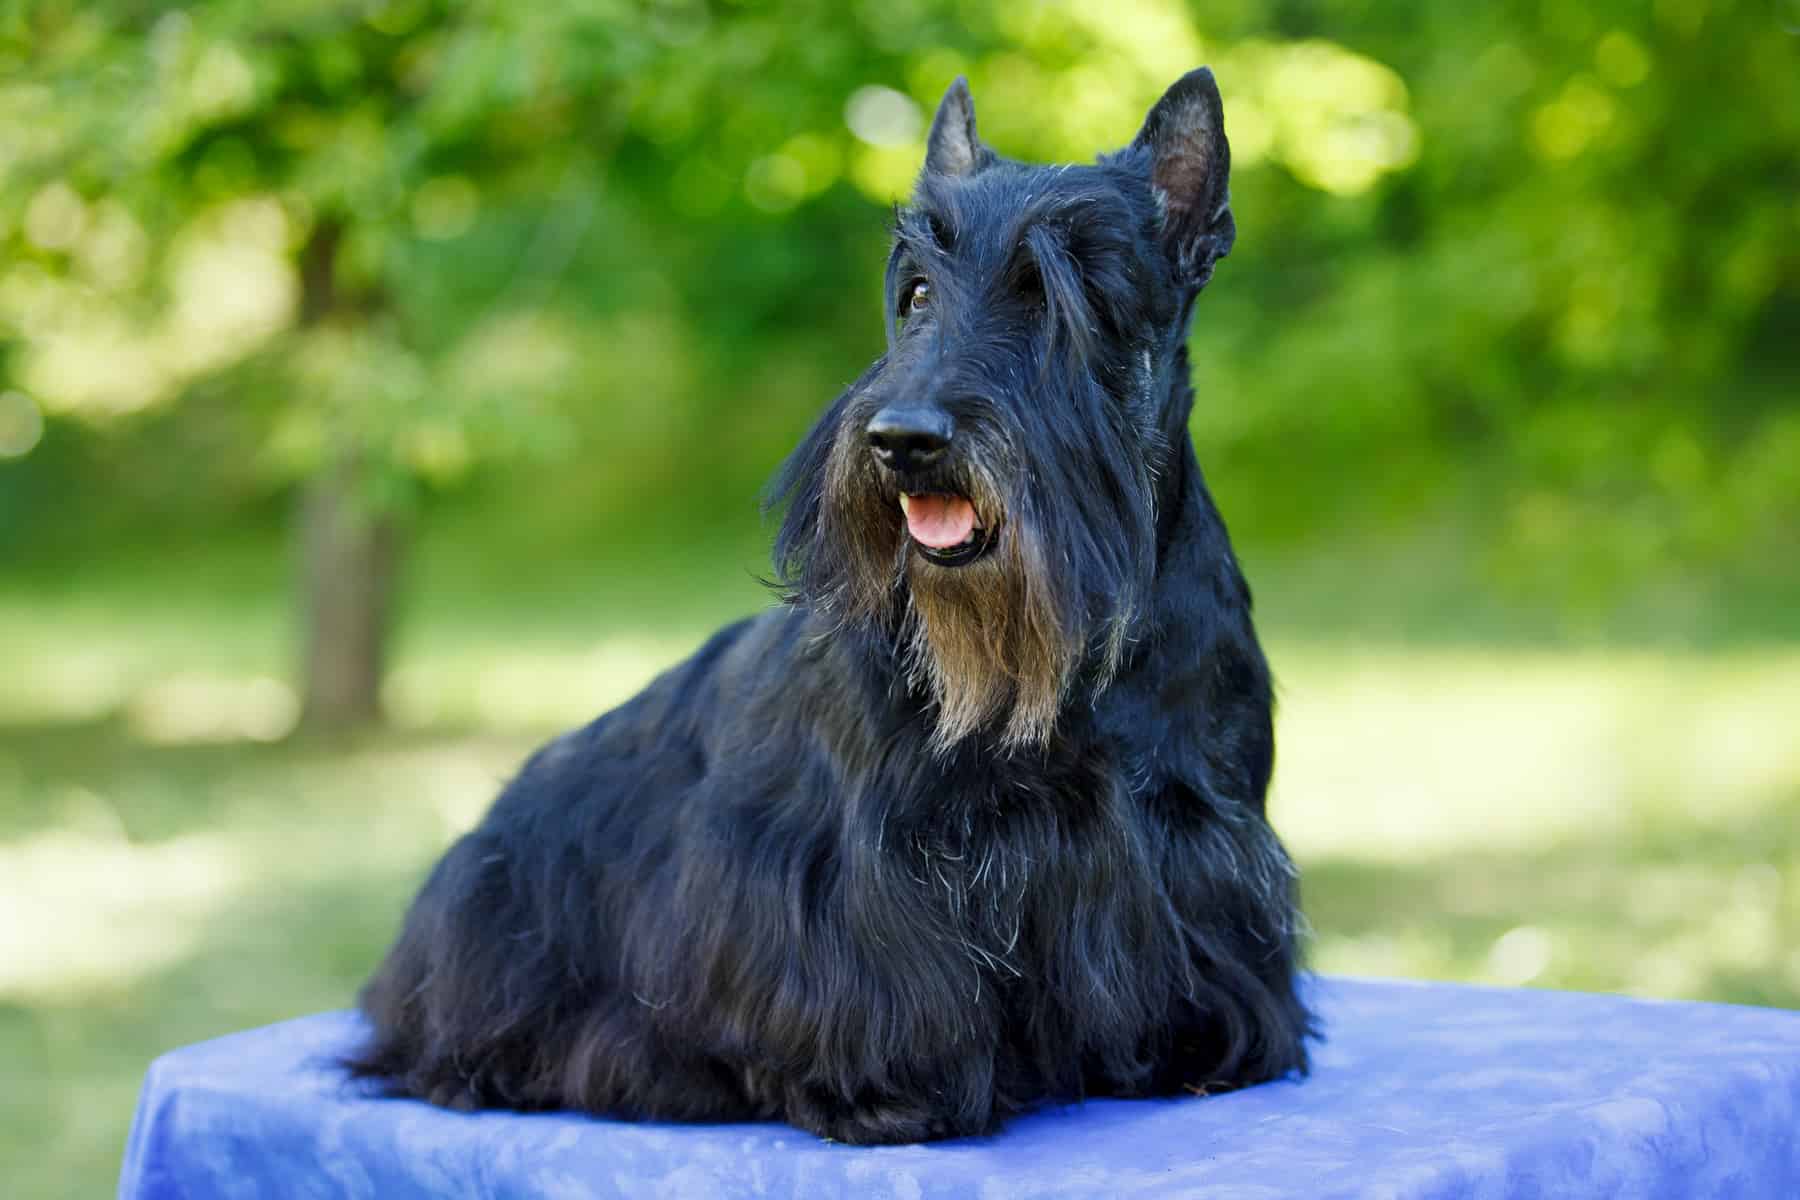 Are Scottish terriers friendly?